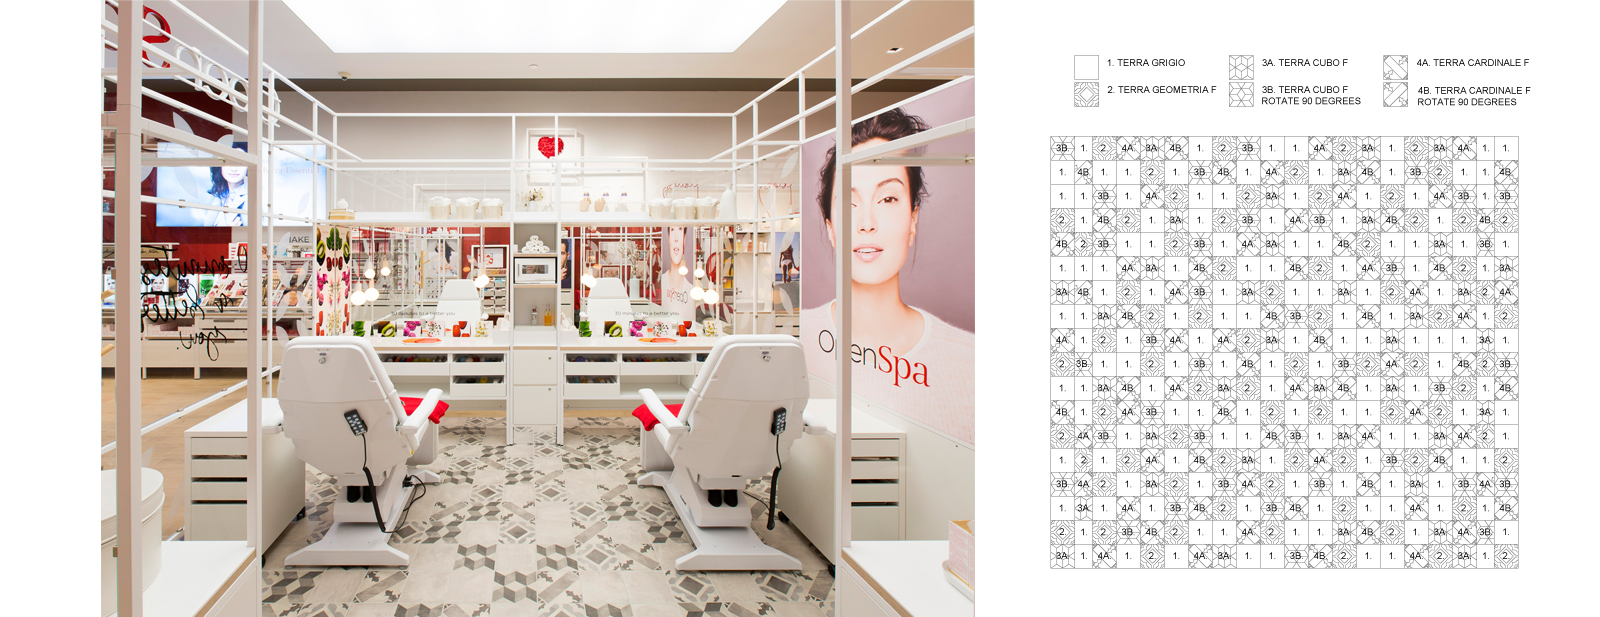 Clarins opens first US store at King of Prussia mall